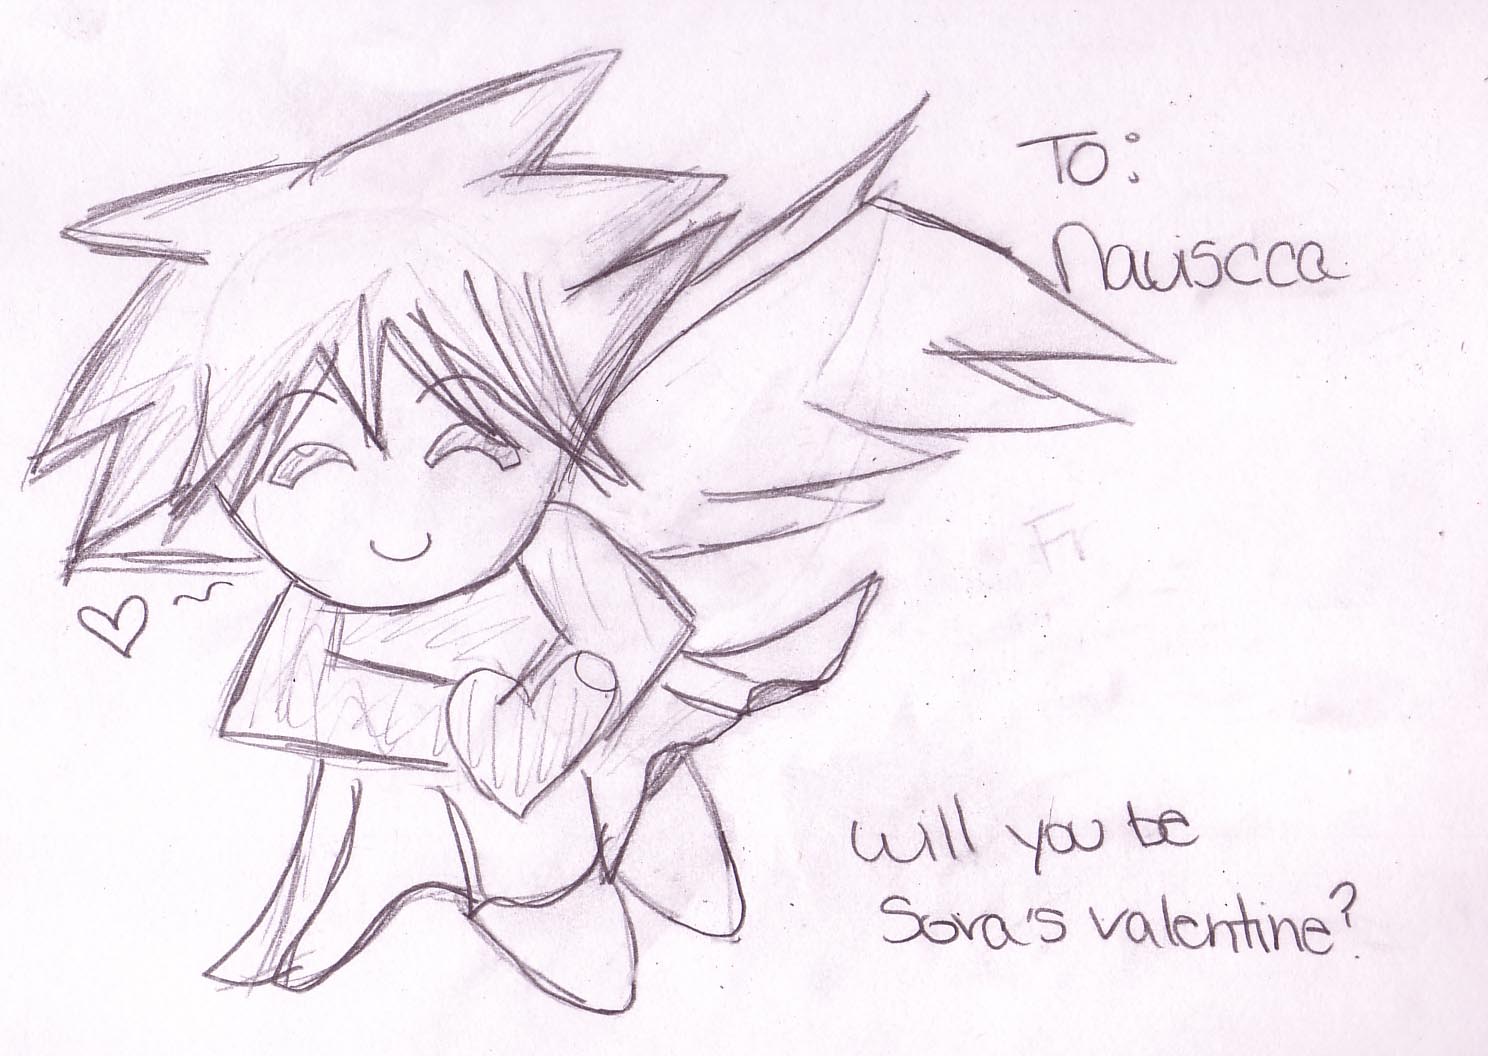 *request* Will you be Sora's Valentine? by cyberkitty13